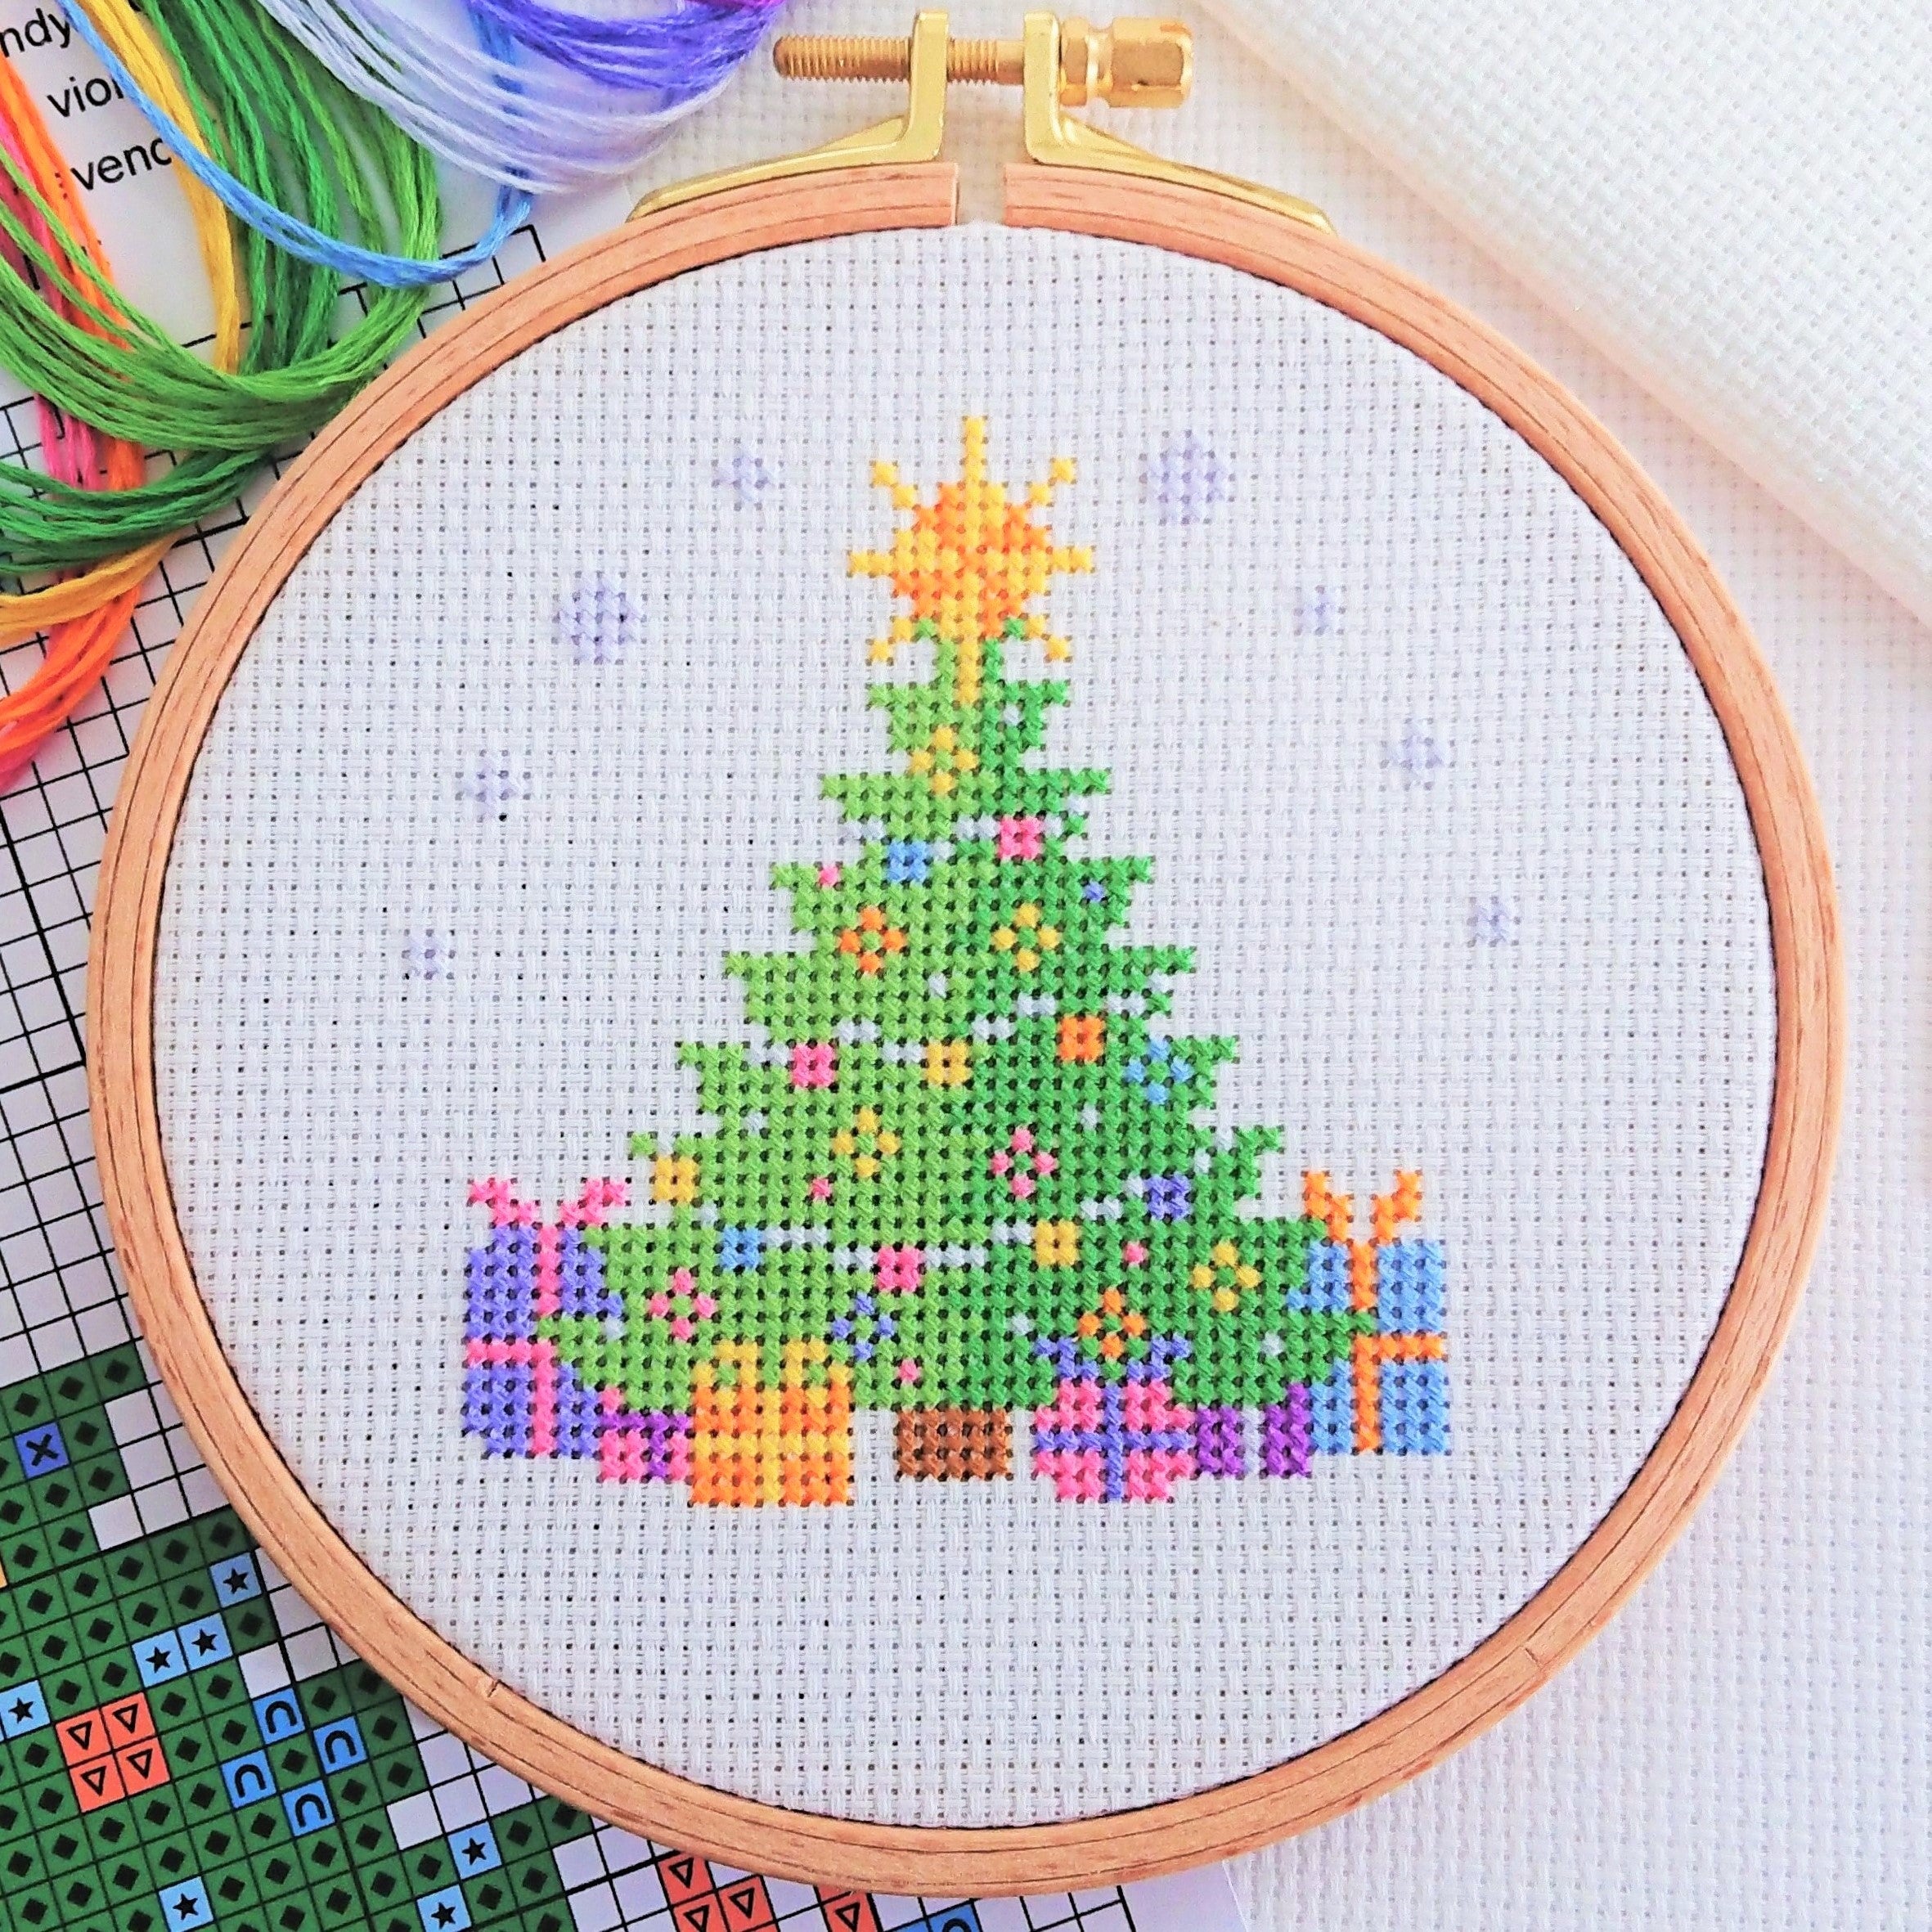 Set of 20 Christmas Trees Floss Drops Cross Stitching |Cross Stitch |  Embroidery | Hand Embroidery | Needlepoint | Sewing | Hand Sewing